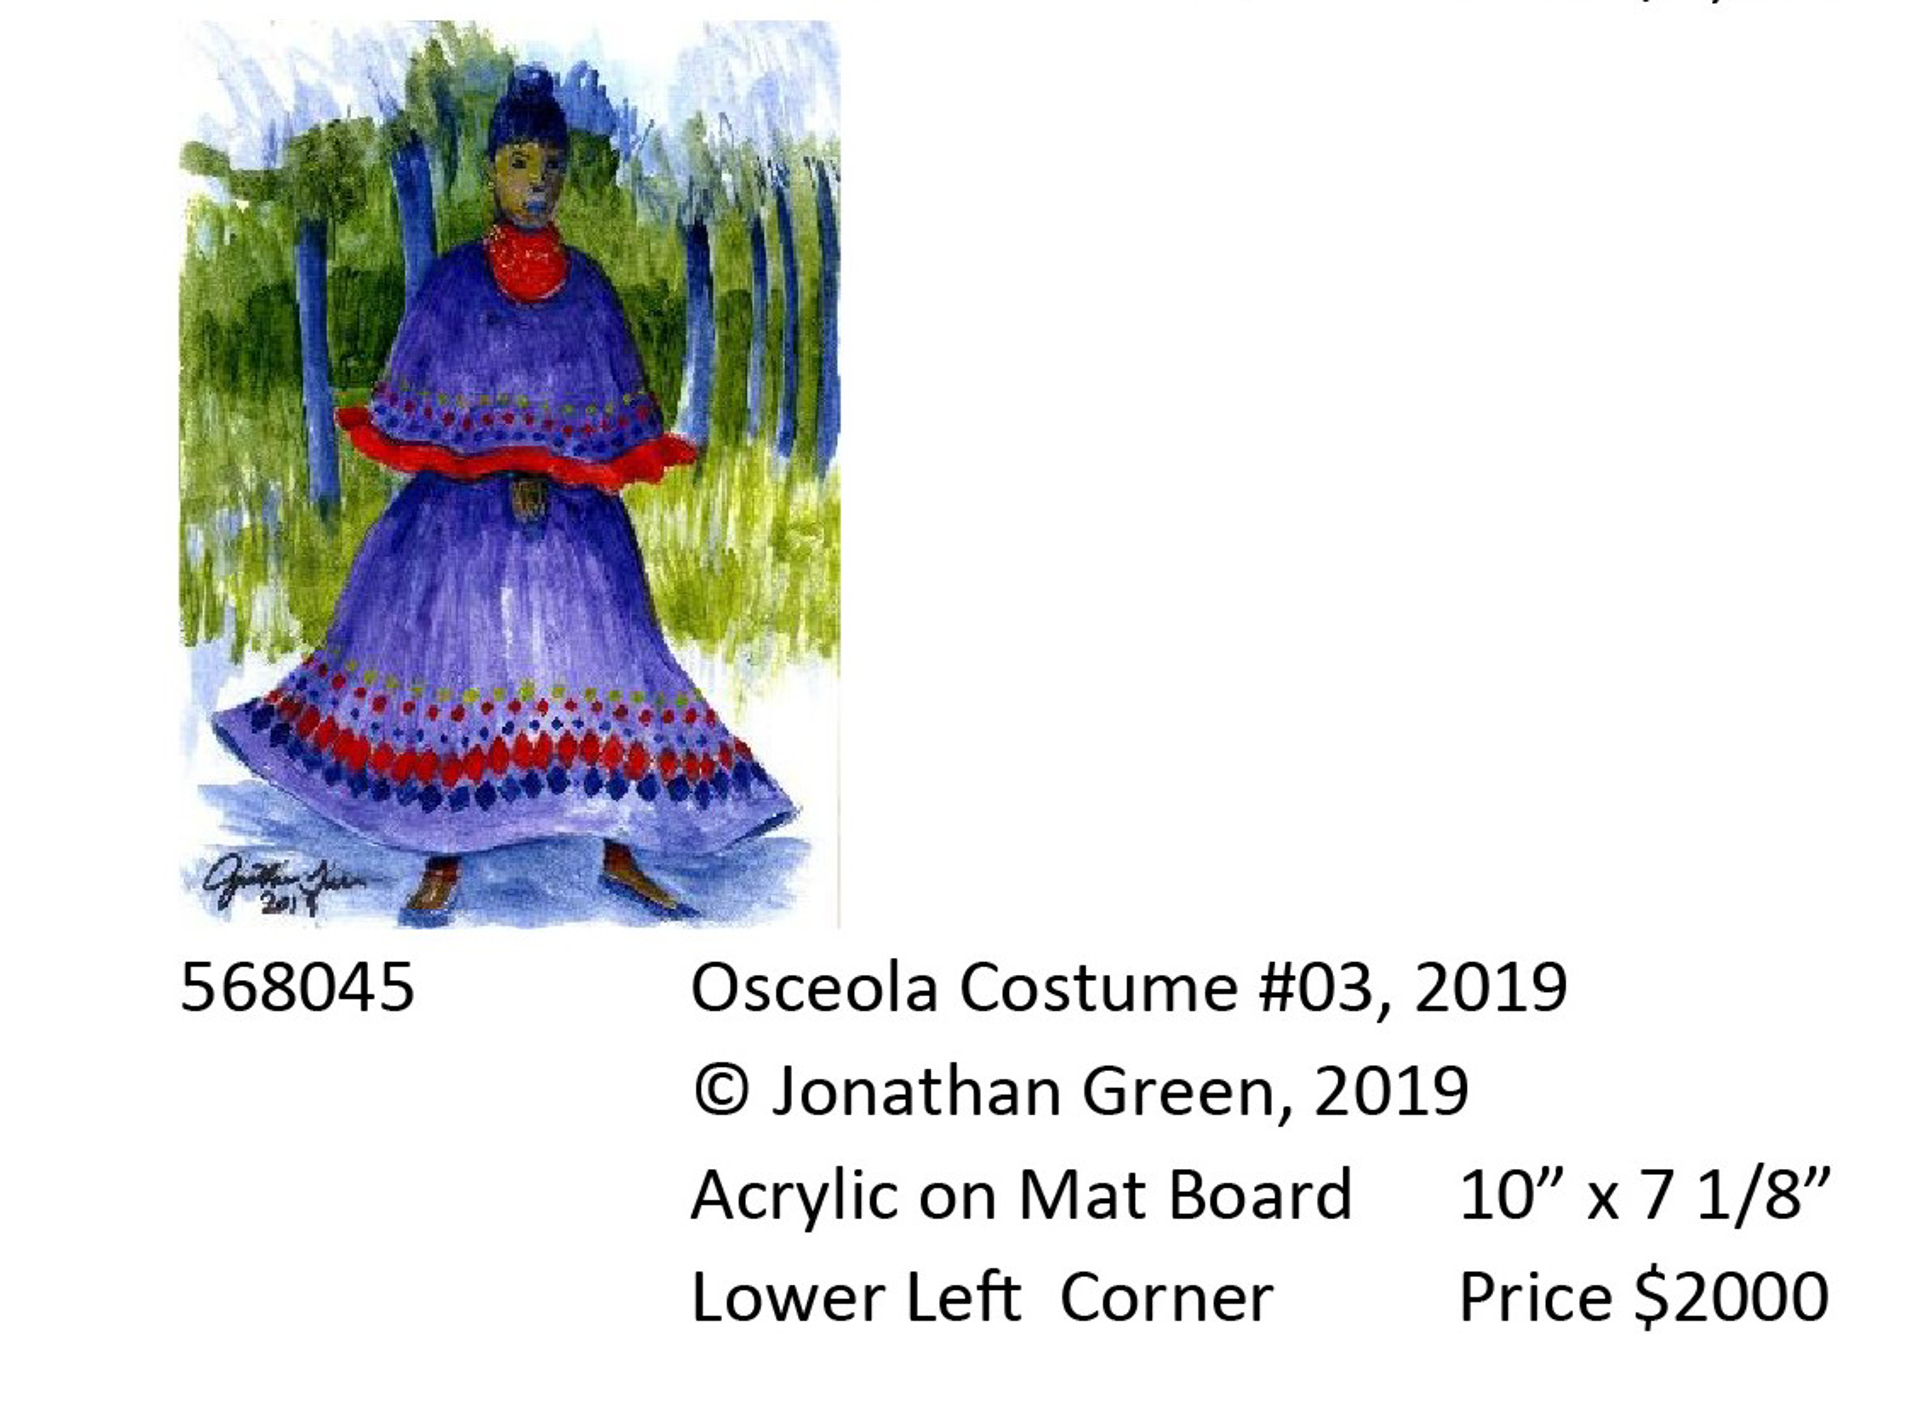 Osceola Costume #3 by Jonathan Green - Pop-Up Event